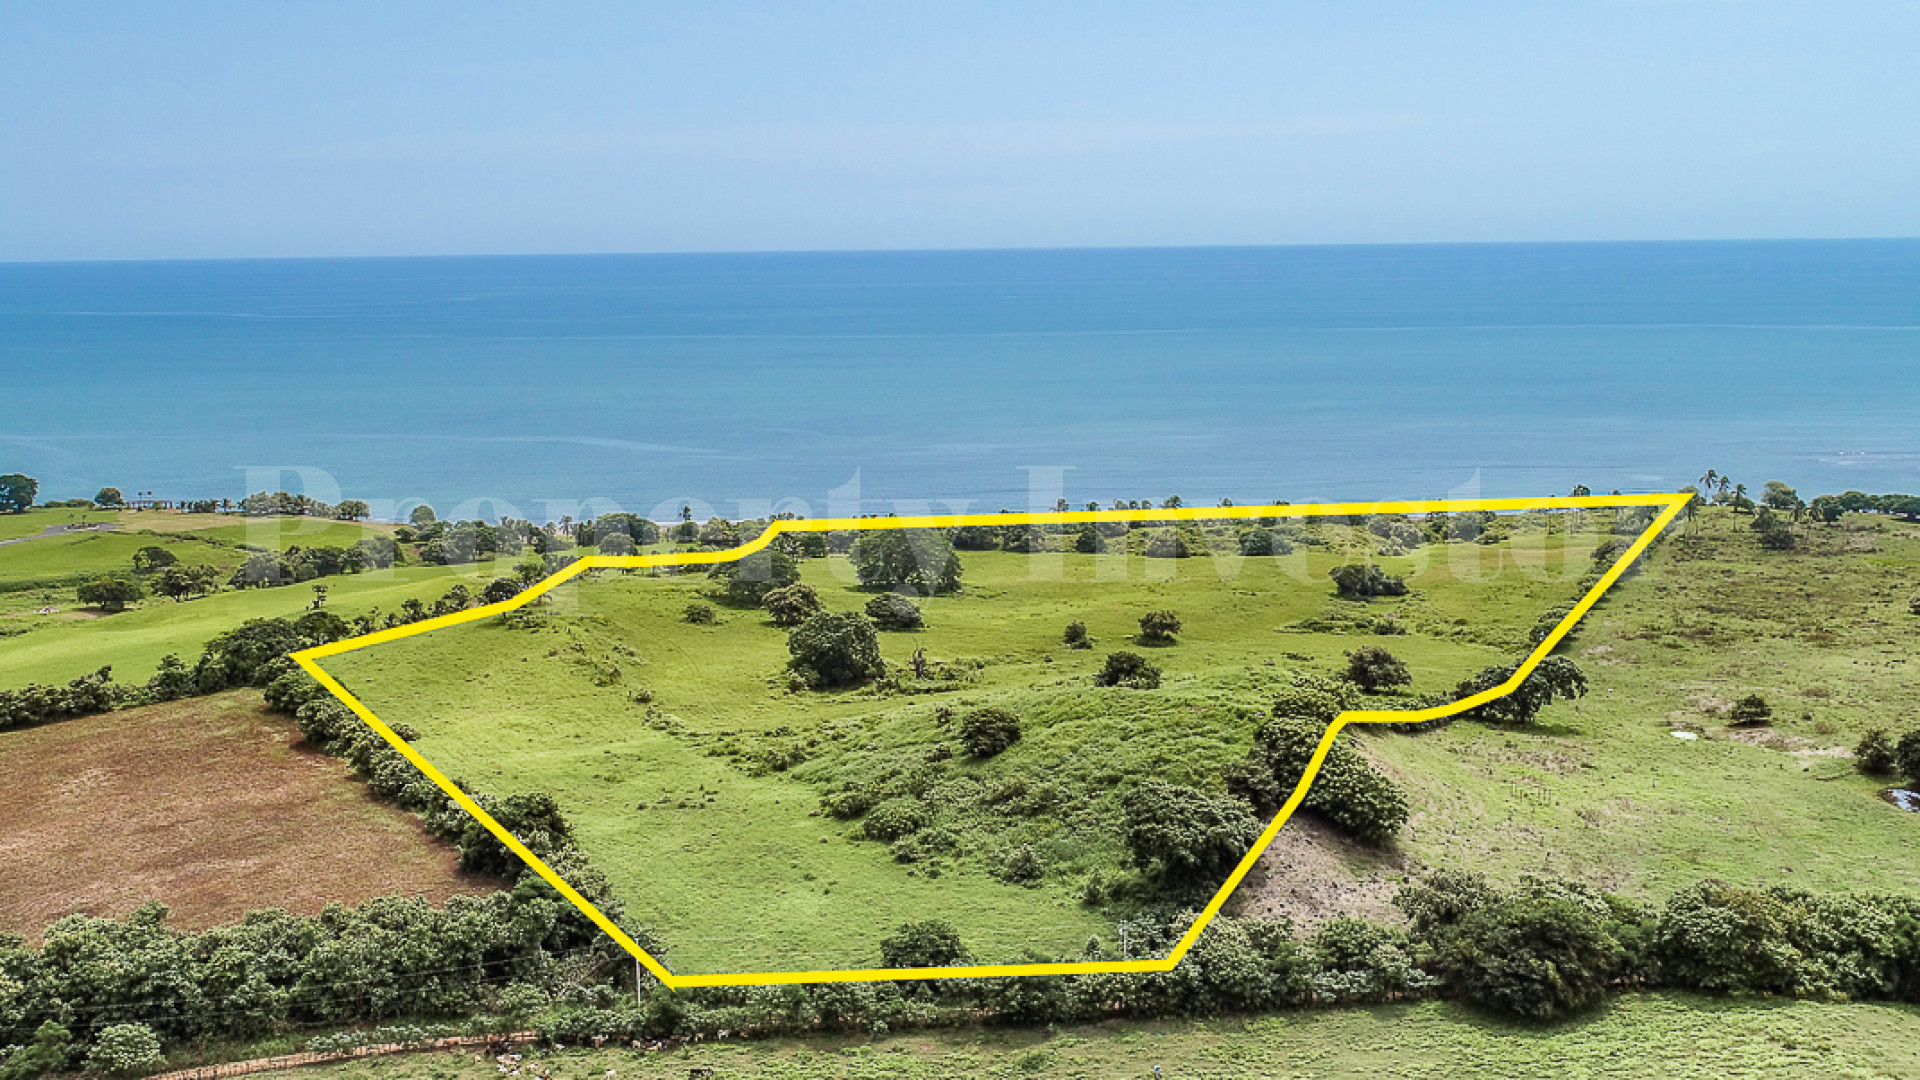 13.6 Hectare Commercial Beachfront Lot for Sale in El Manantial, Panama